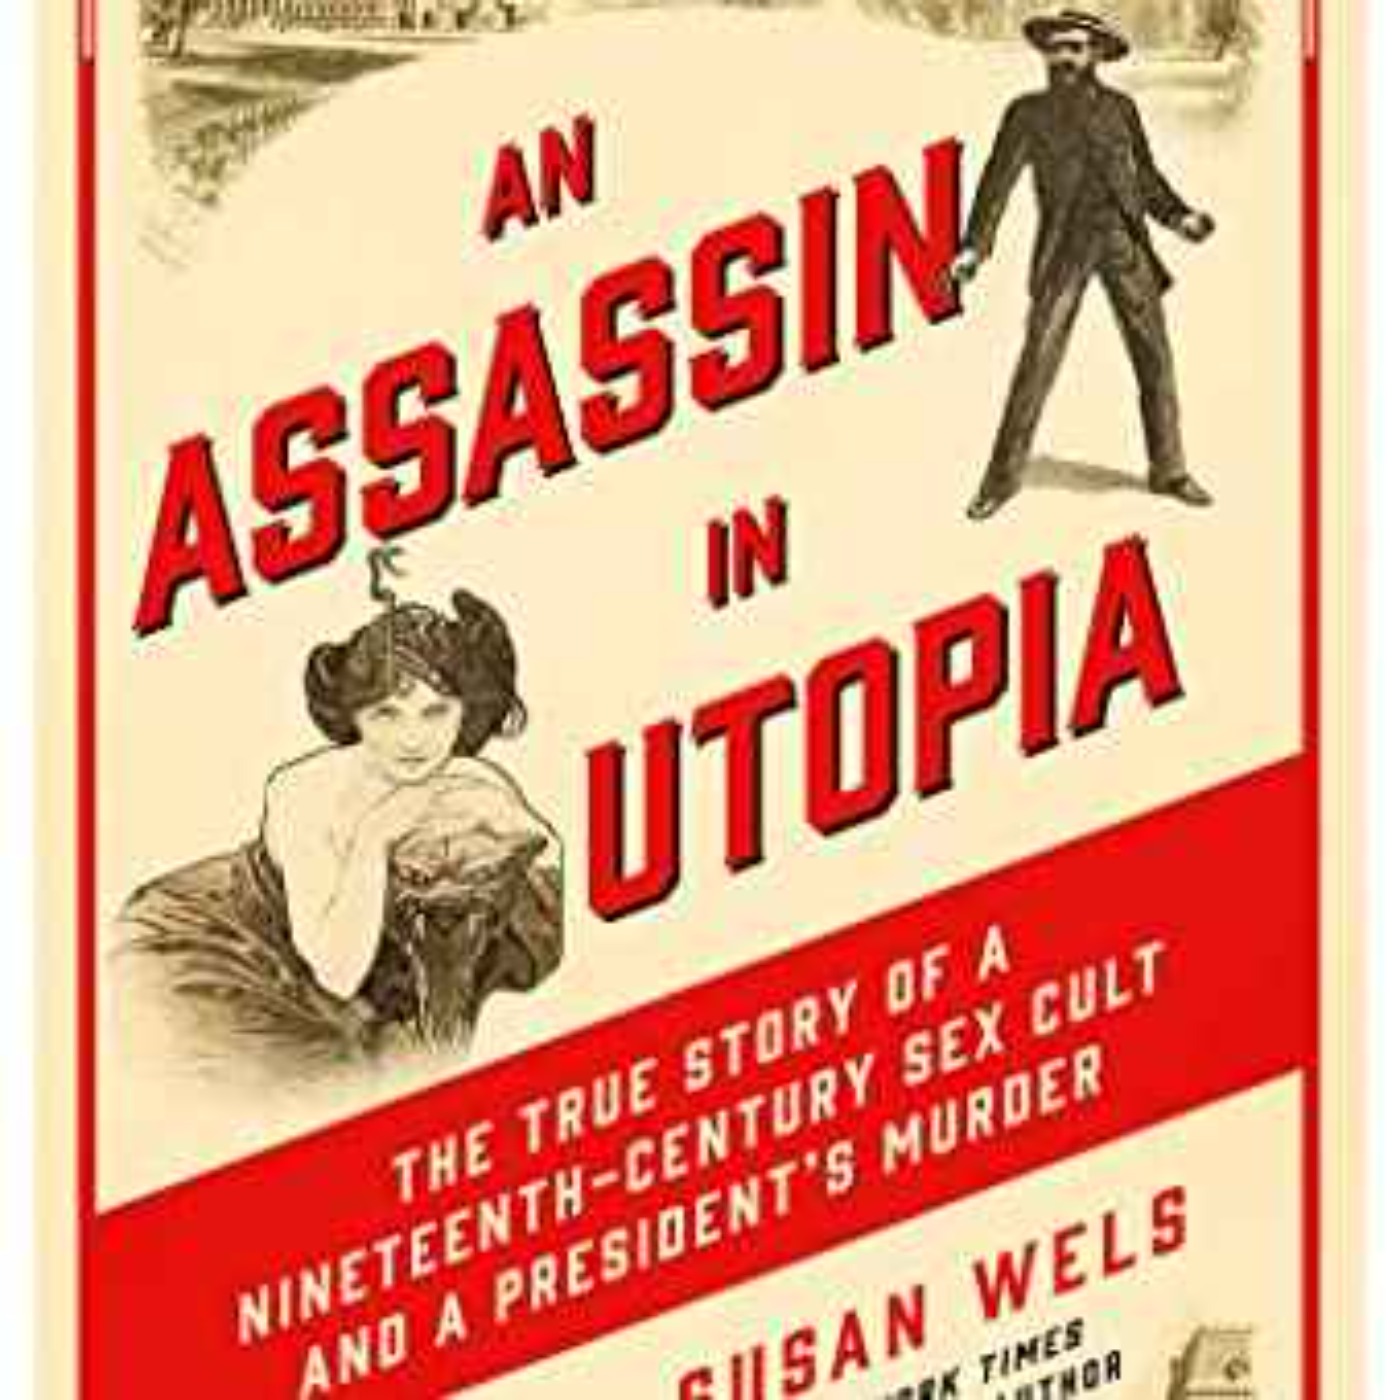 Susan Wels - An Assassin in Utopia: The True Story of a Nineteenth-Century Sex Cult and a President’s Murder